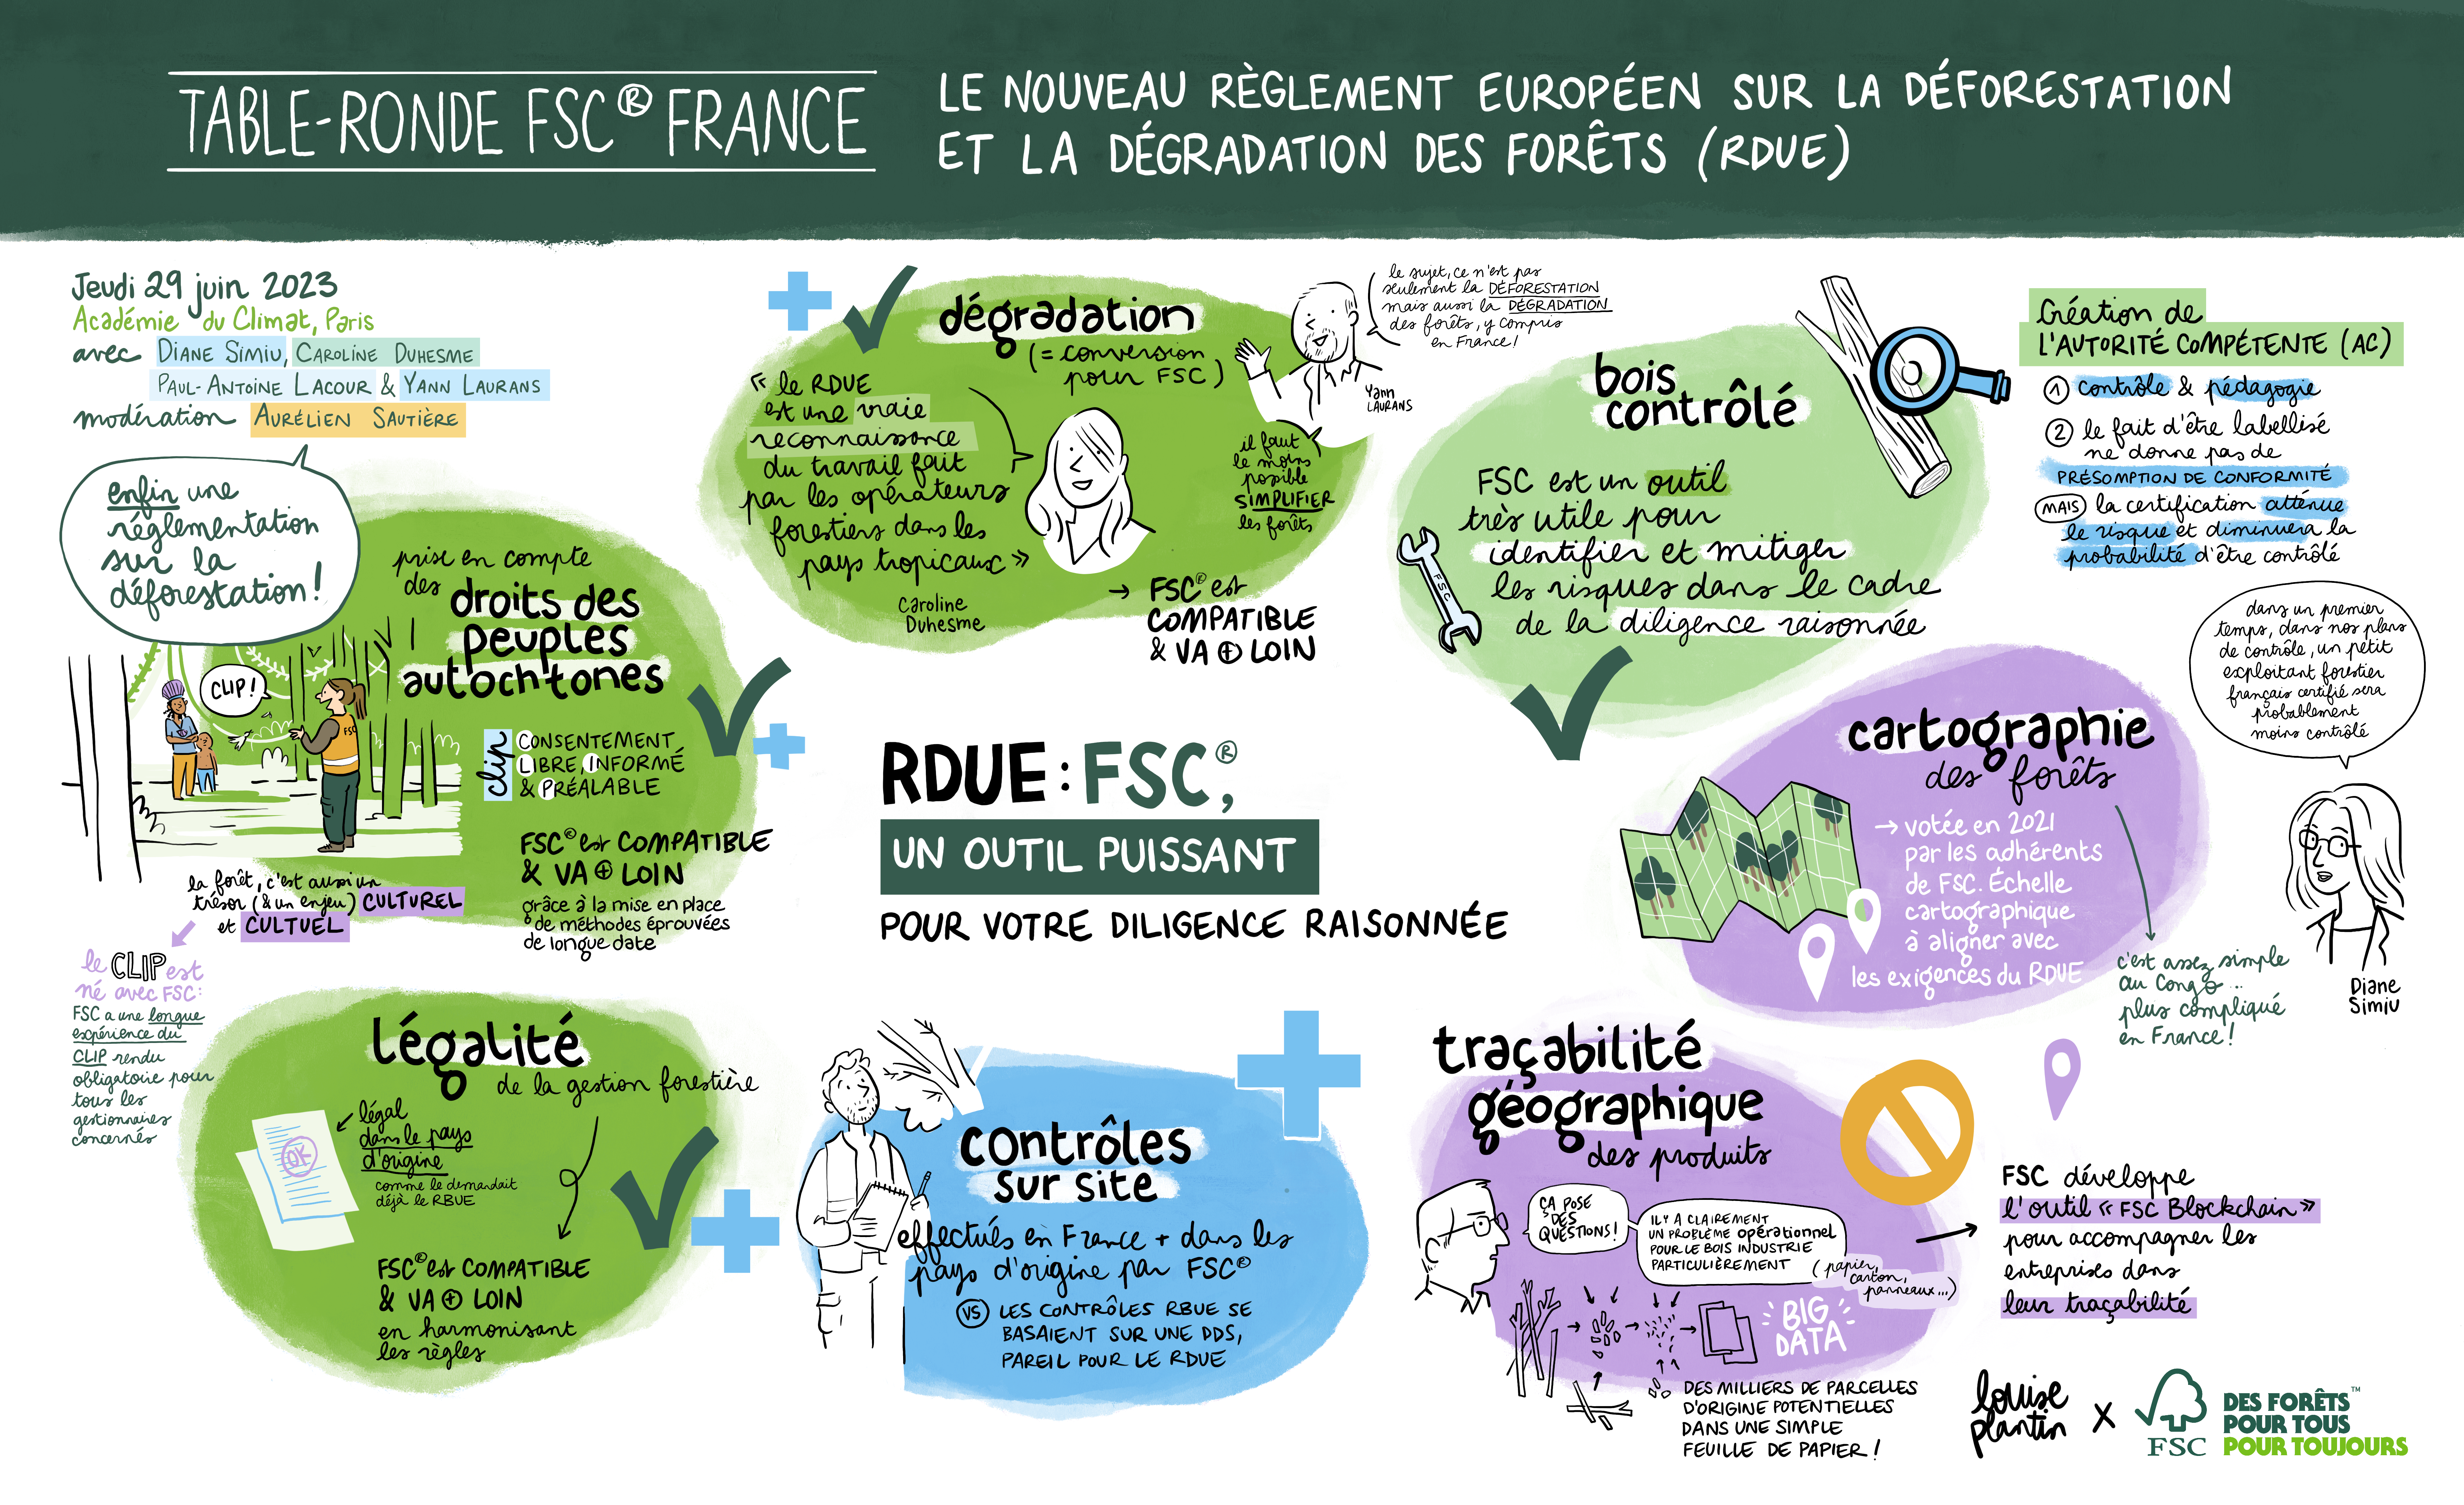 Table-ronde RDUE FSC France